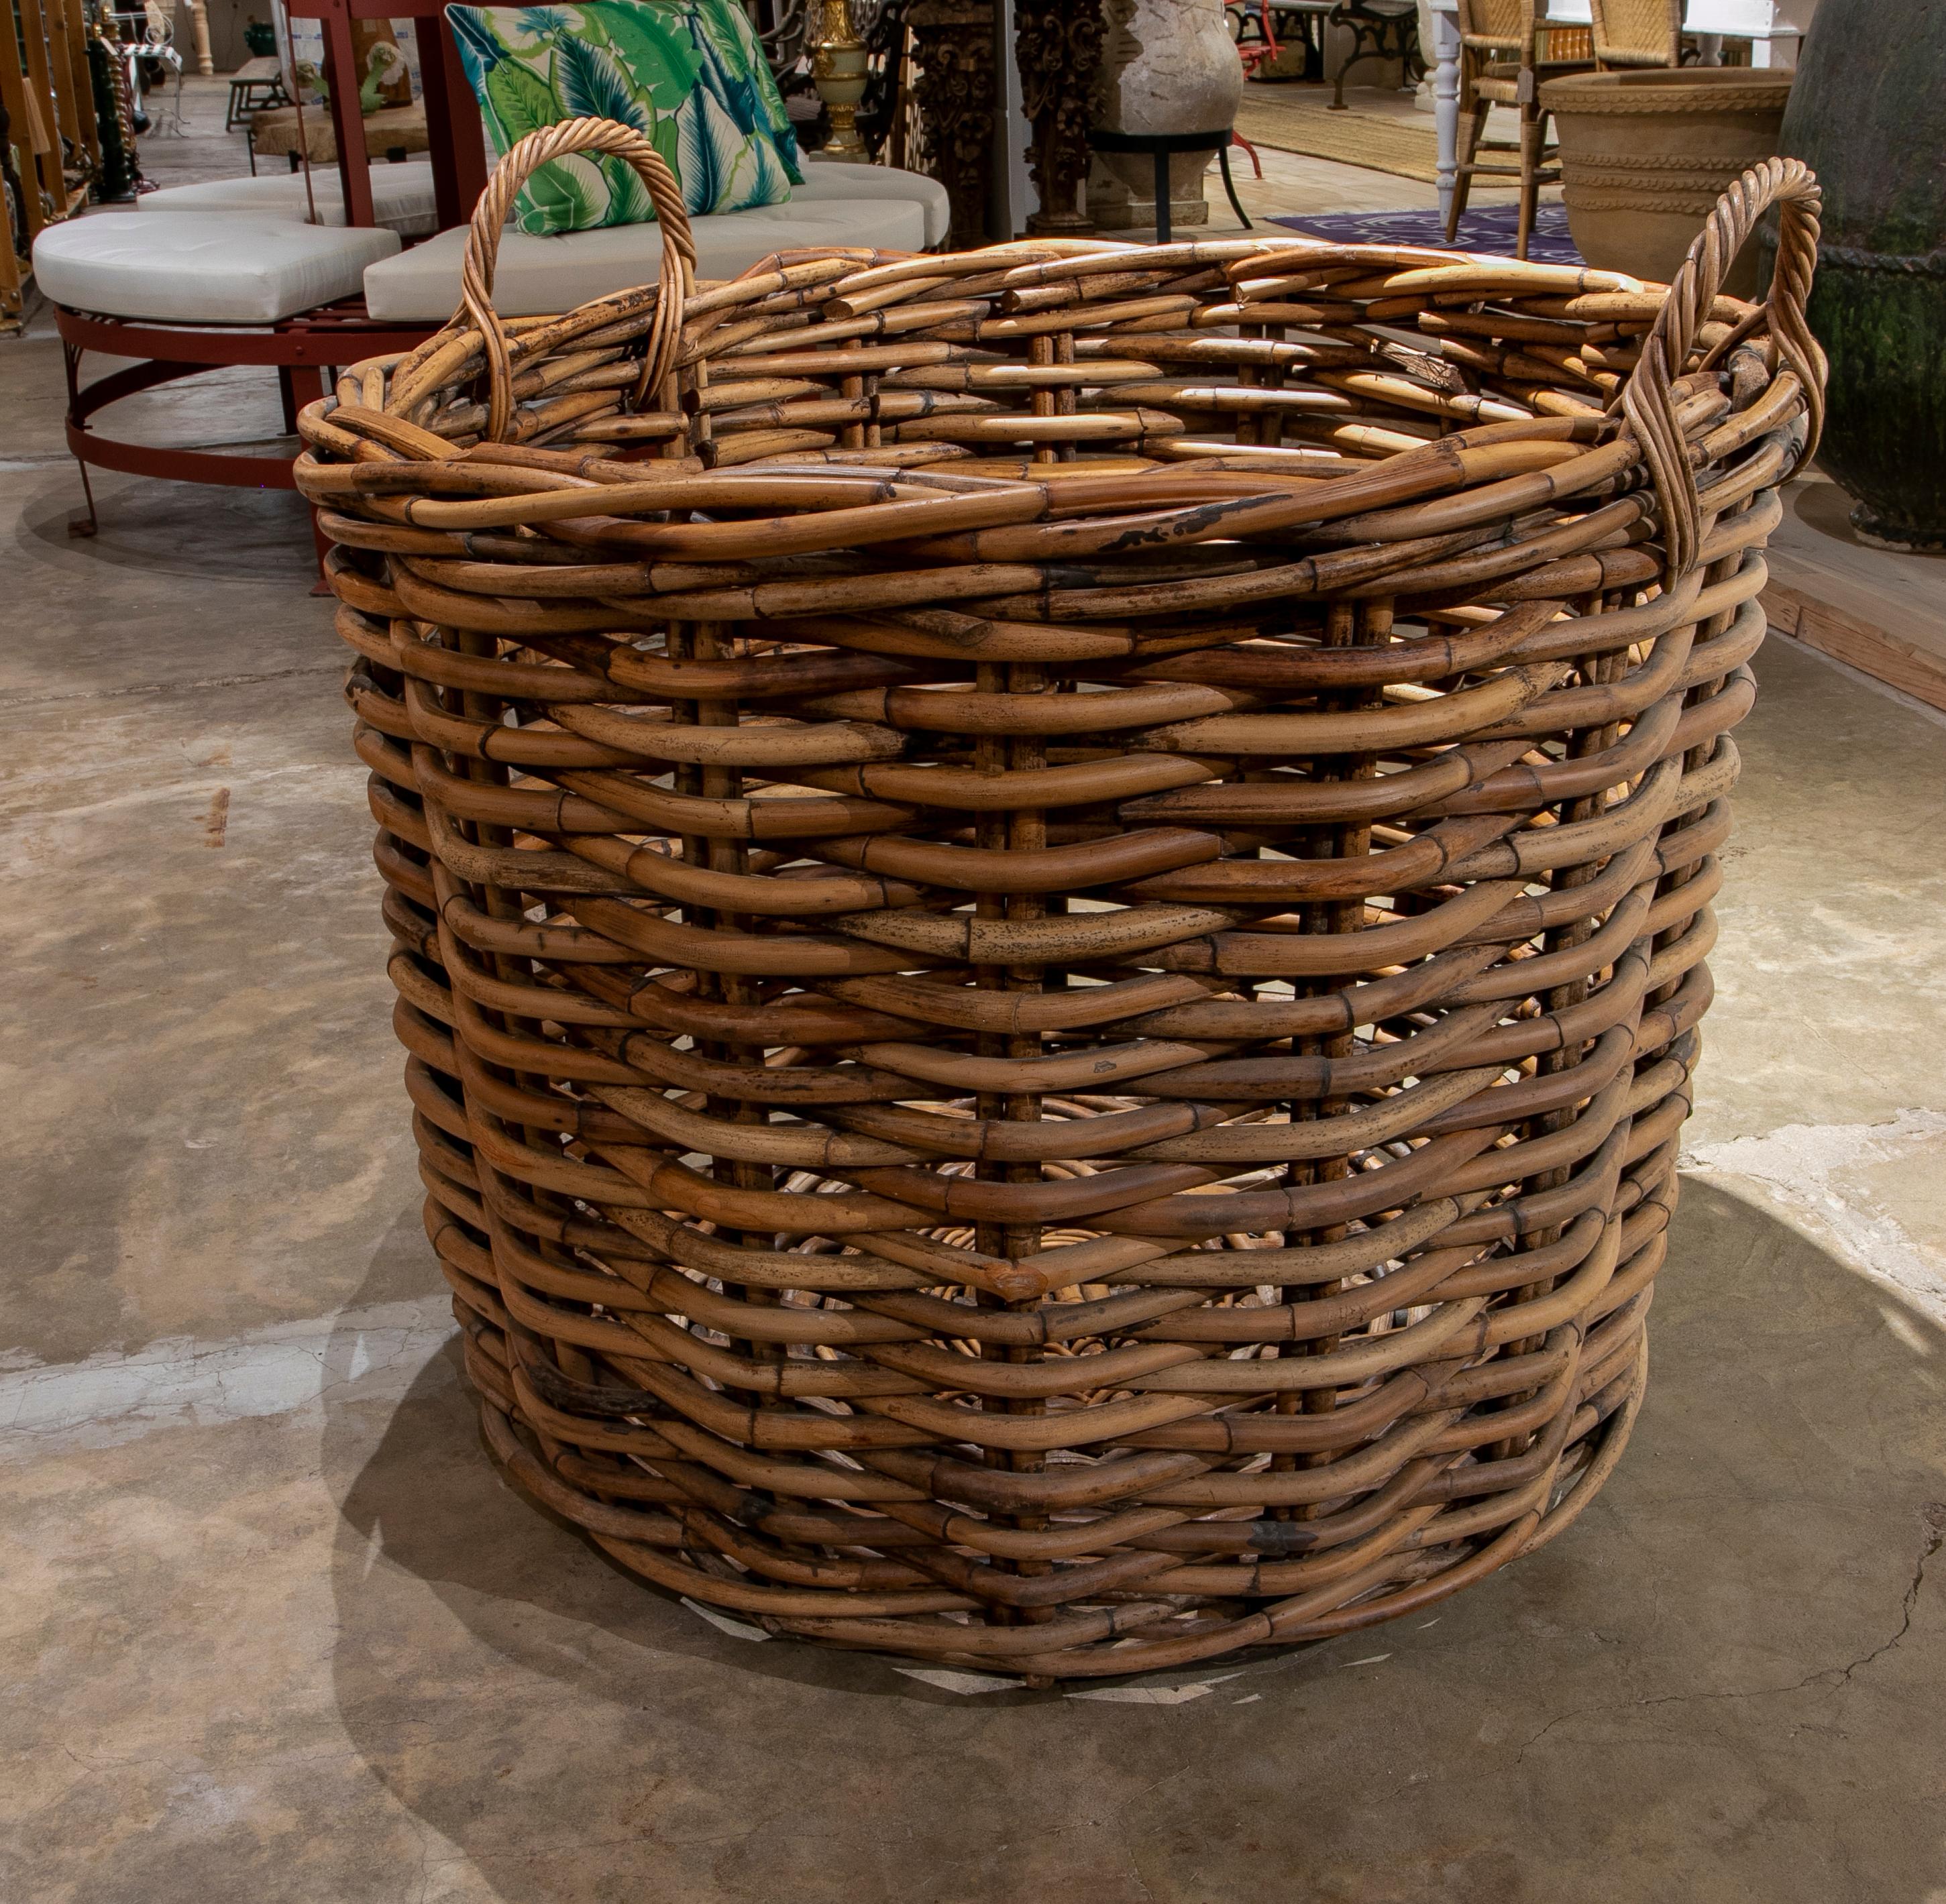 Handmade large bamboo basket with handles for plants or storage.